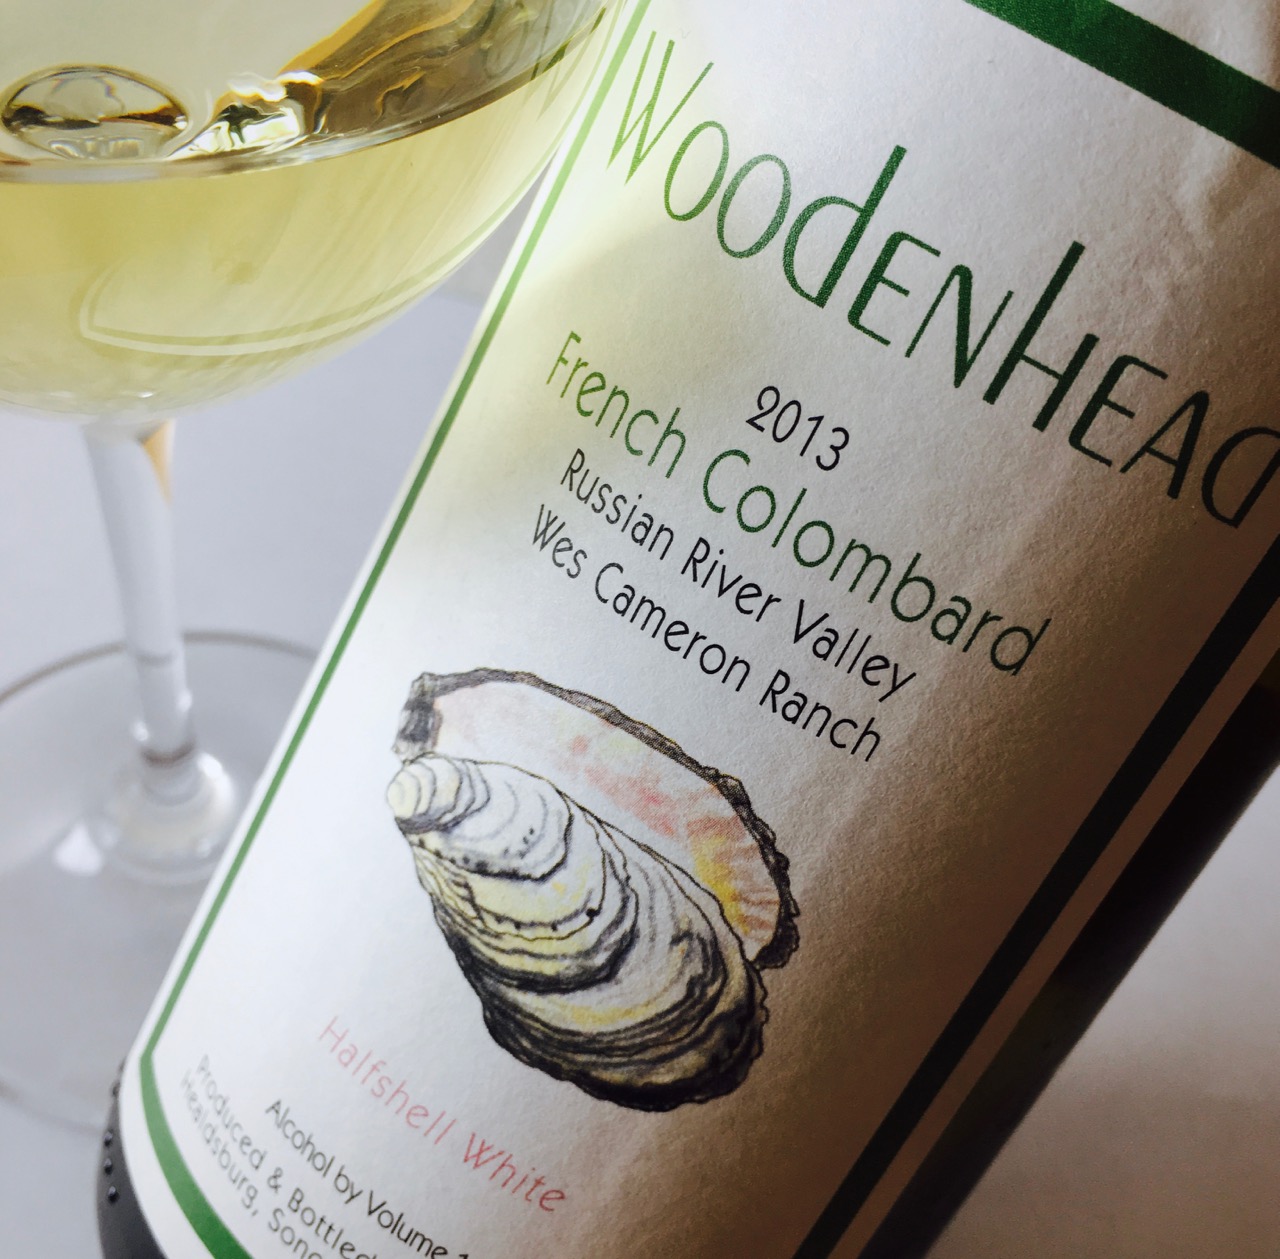 2013 Woodenhead French Colombard Halfshell White Wes Cameron Ranch Russian River Valley, Sonoma County